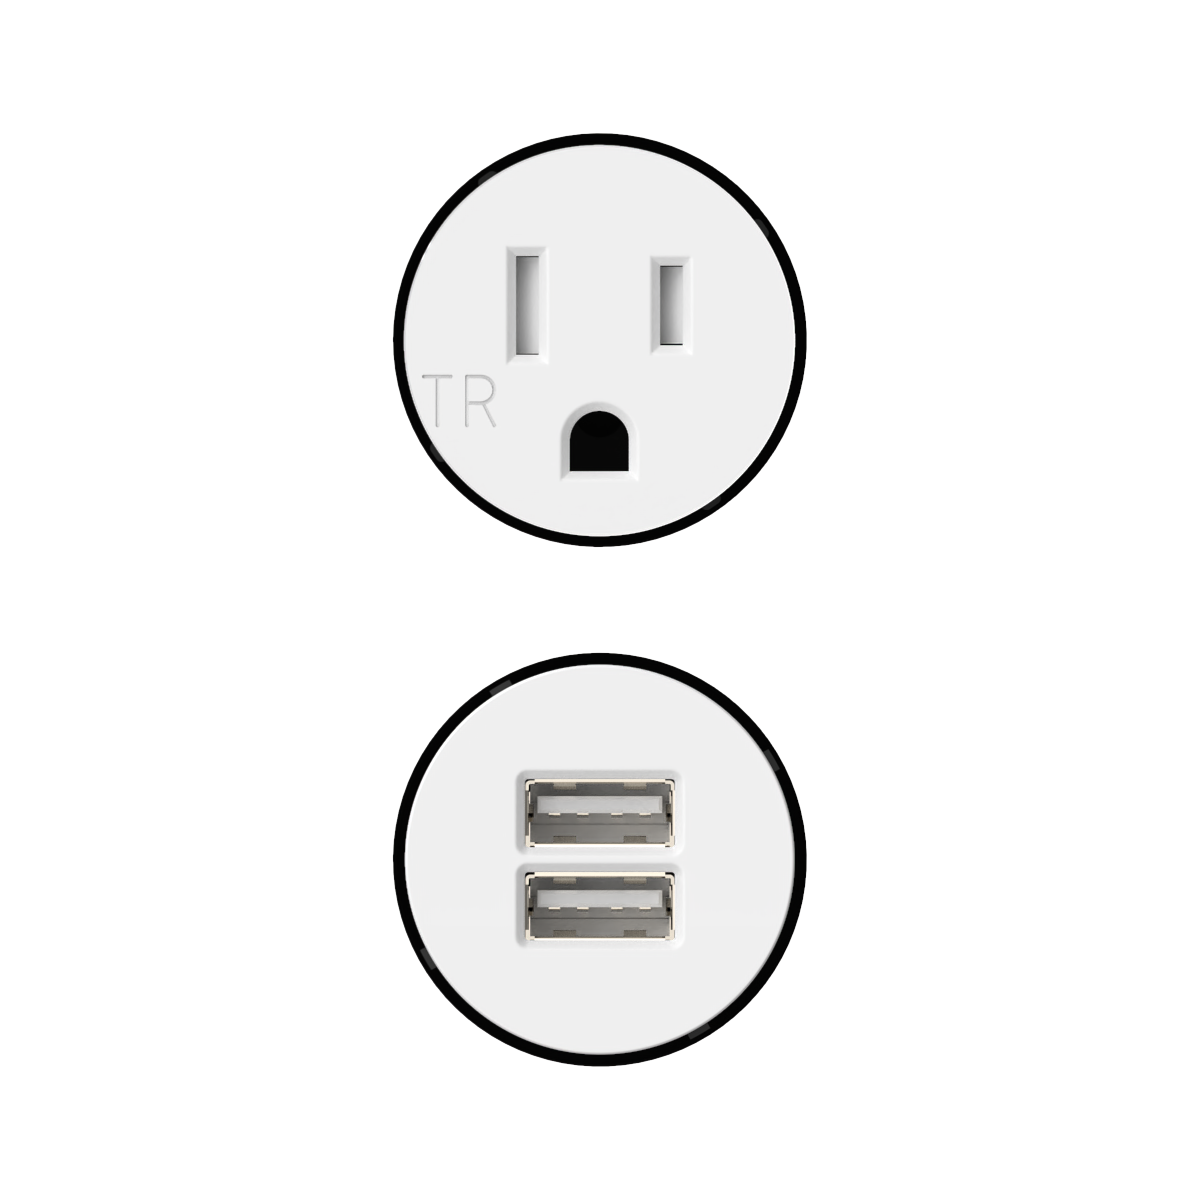 Double Outlet-USB-A Kit